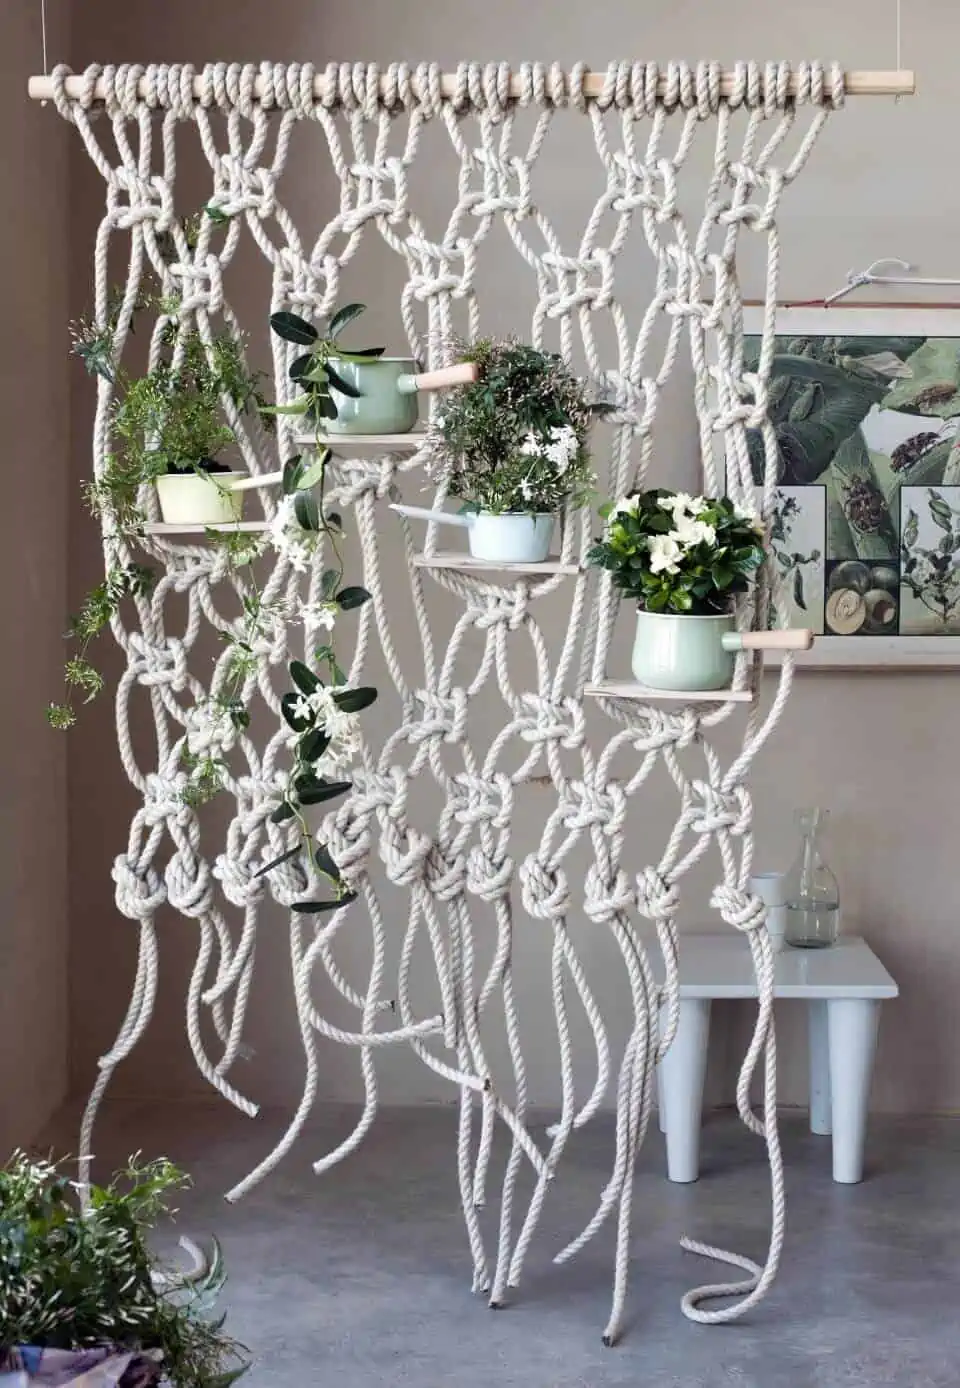 eccentric twisted rope plant décor inspiration